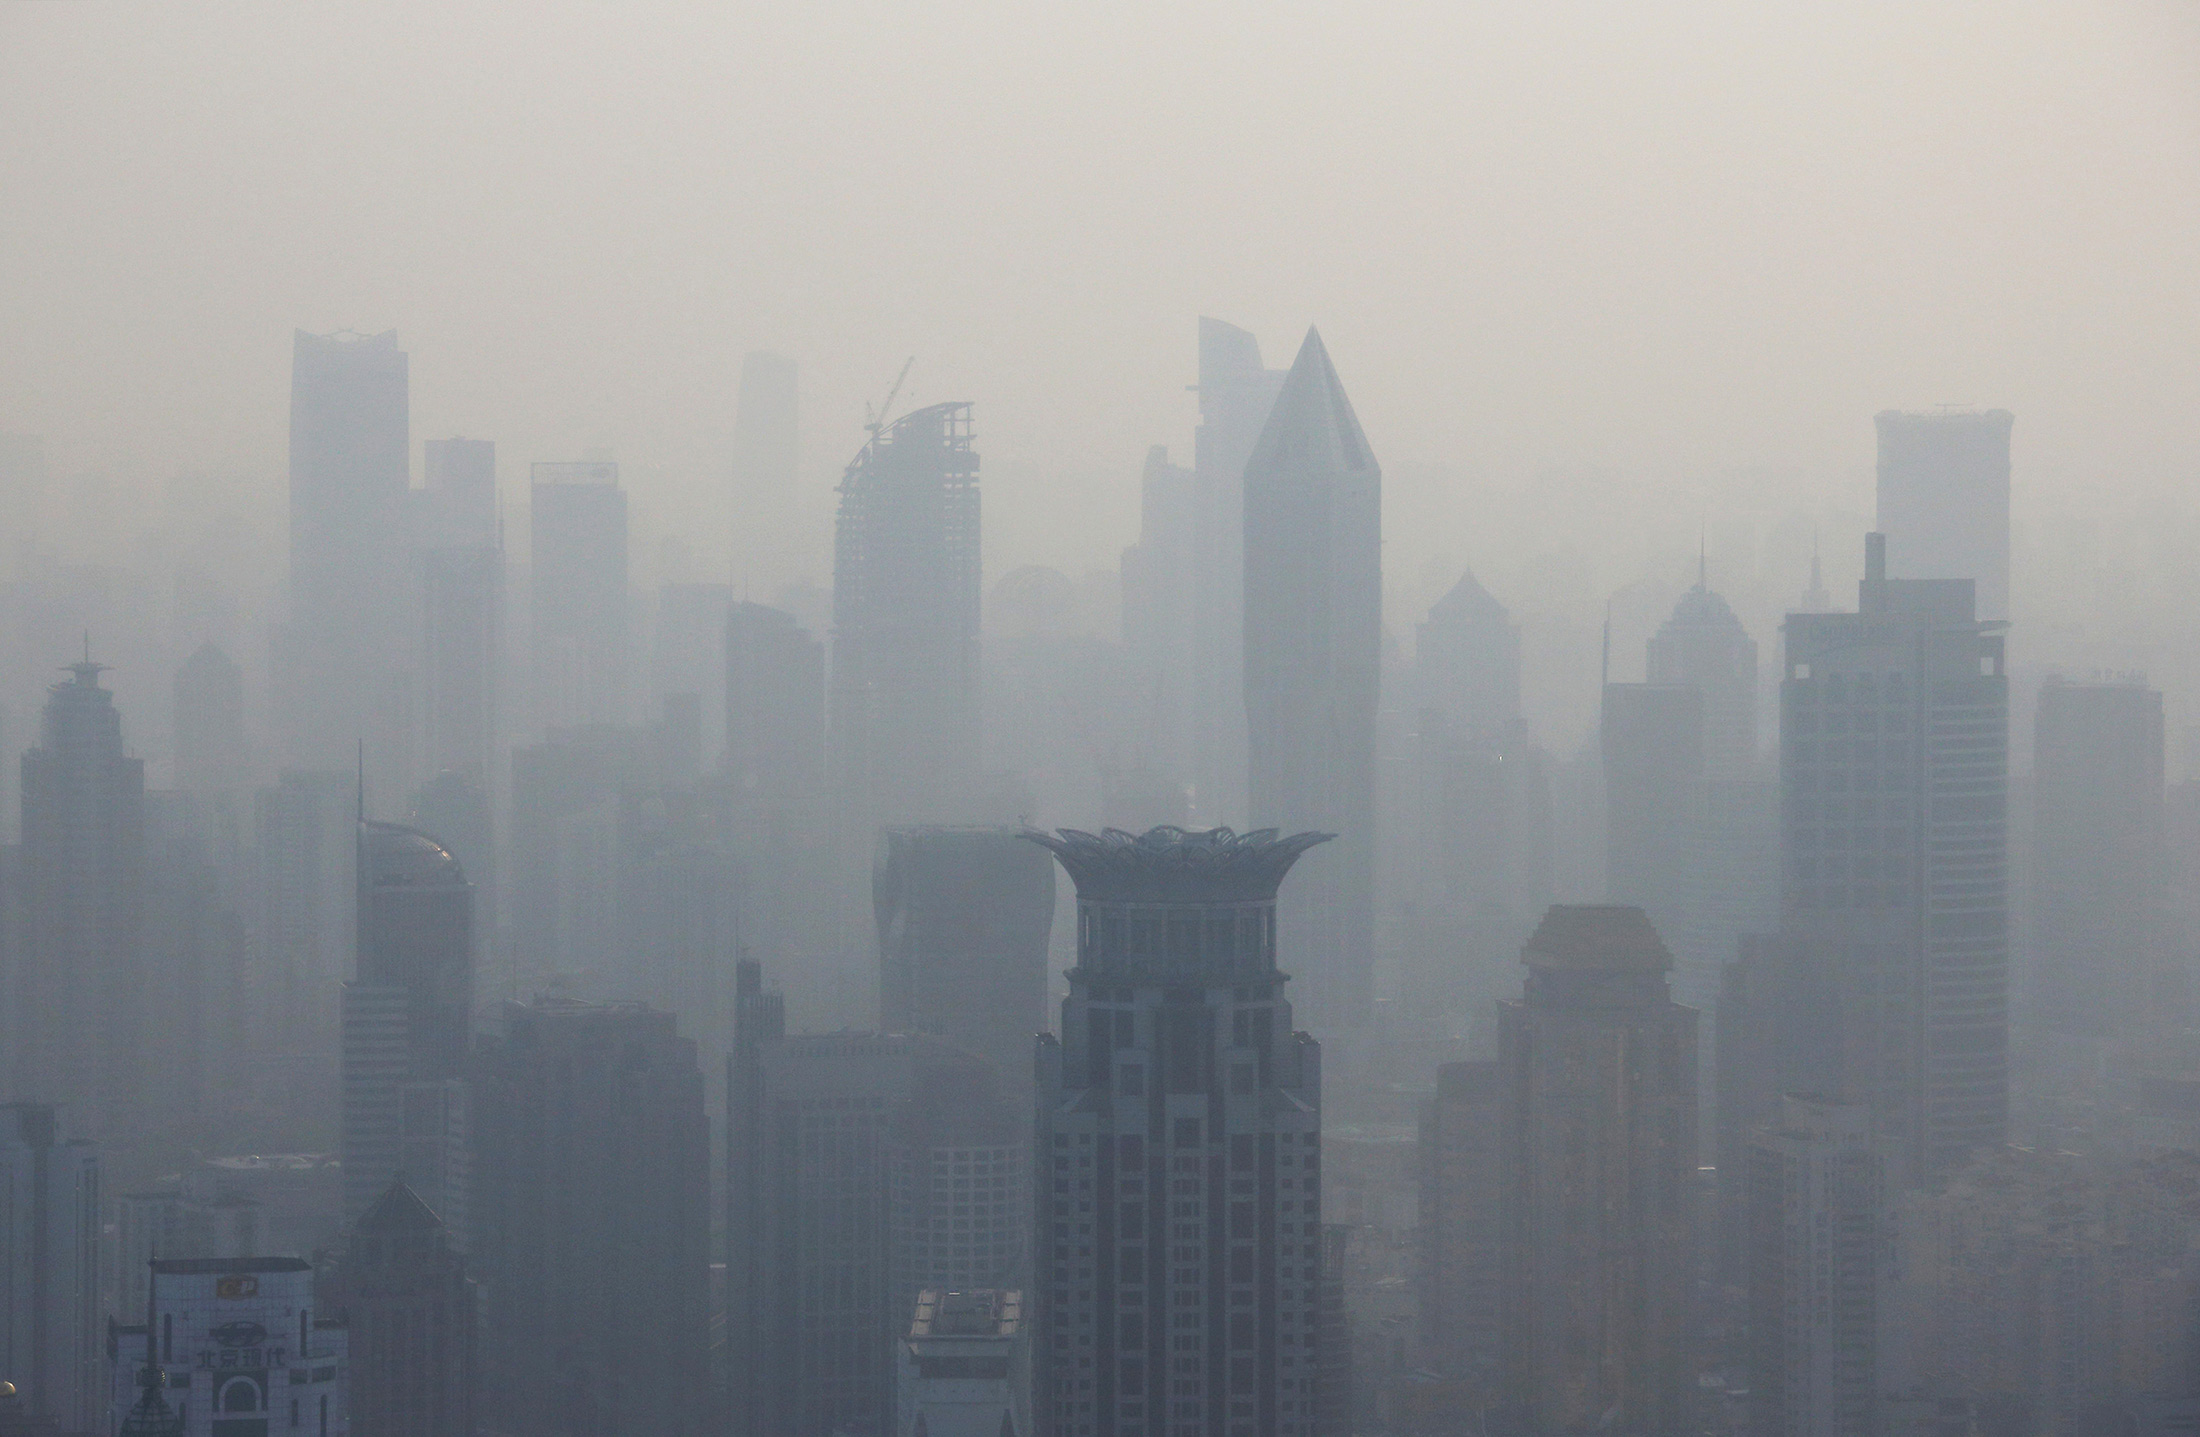 Commercial and residential buildings stand shrouded in haze in Shanghai, China, on April 18.
